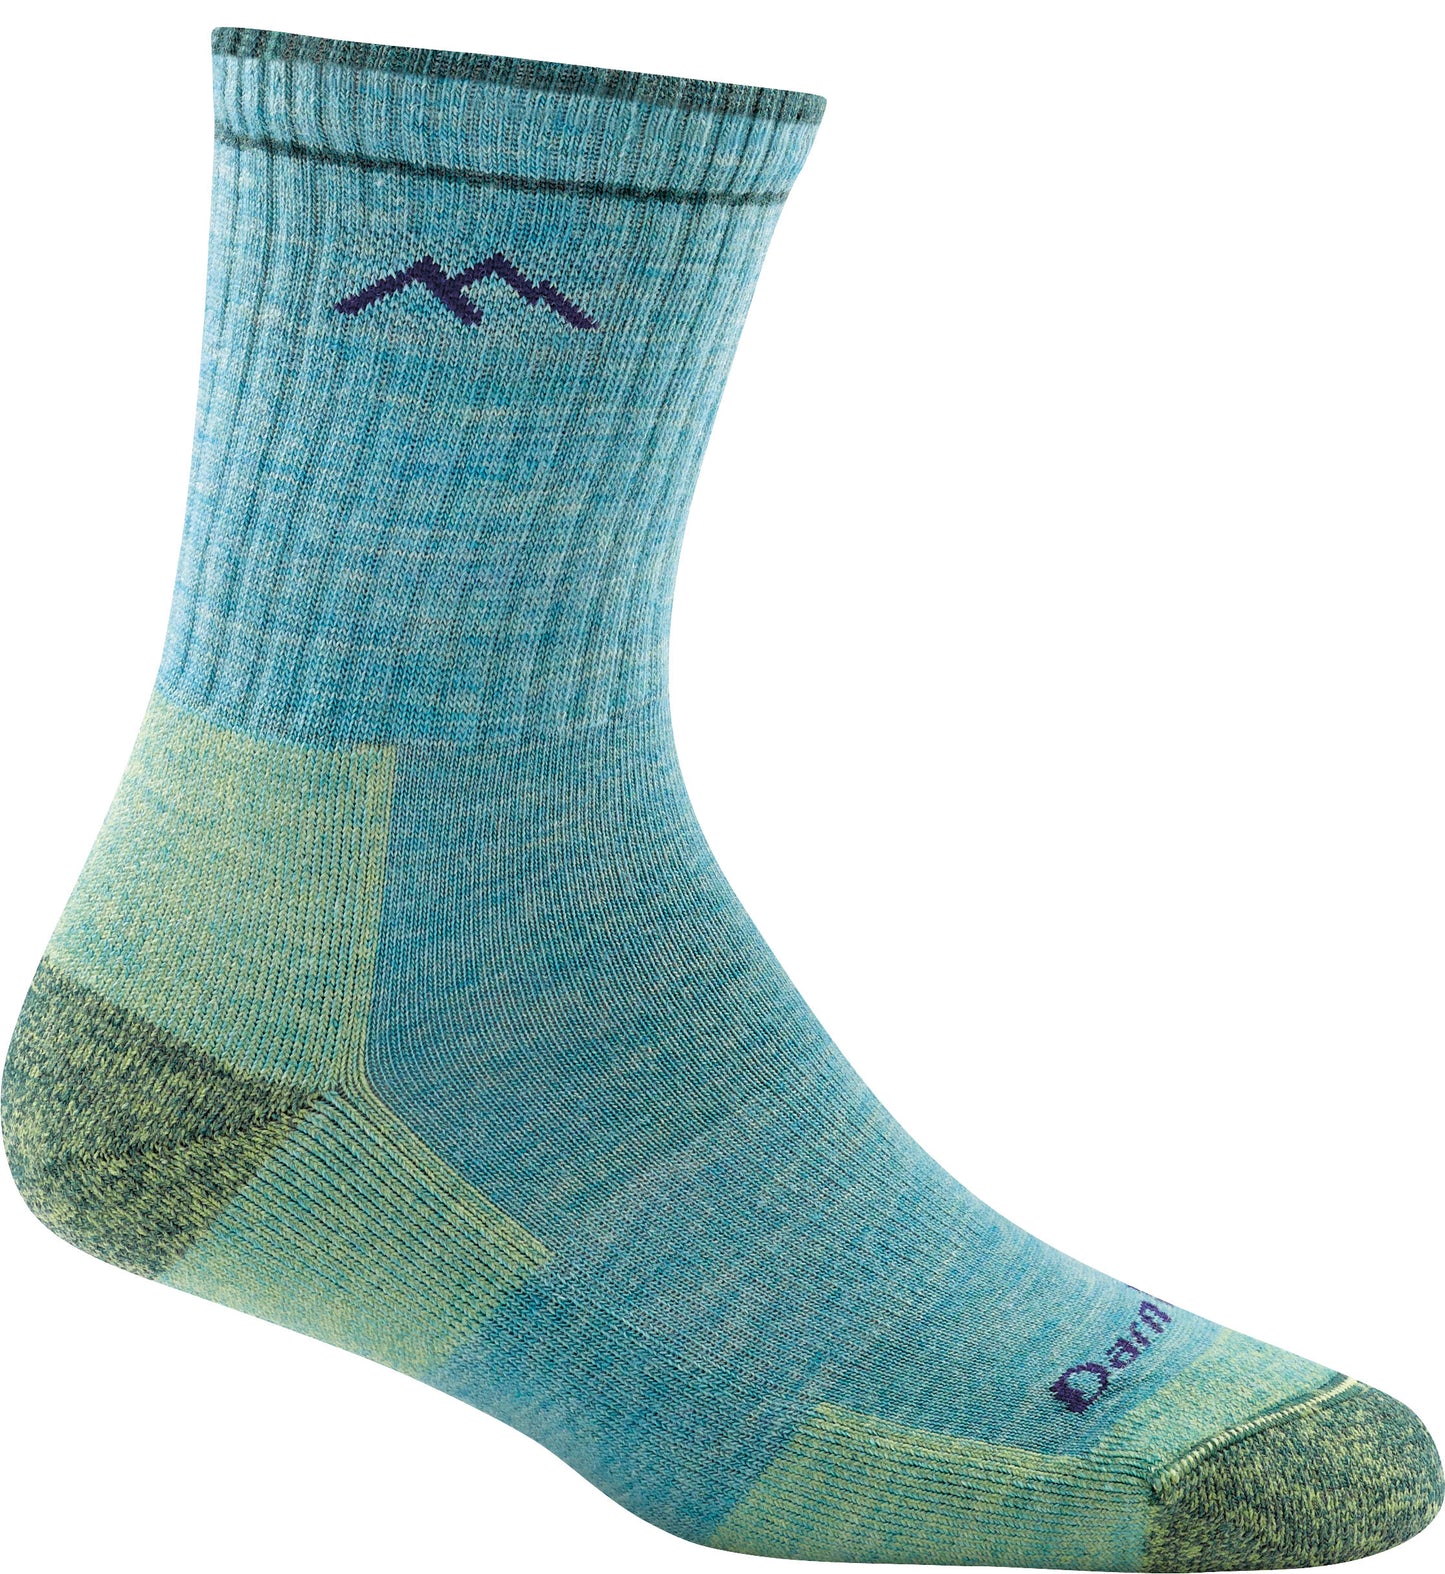 Ladies country clothing sock in aqua heather colours